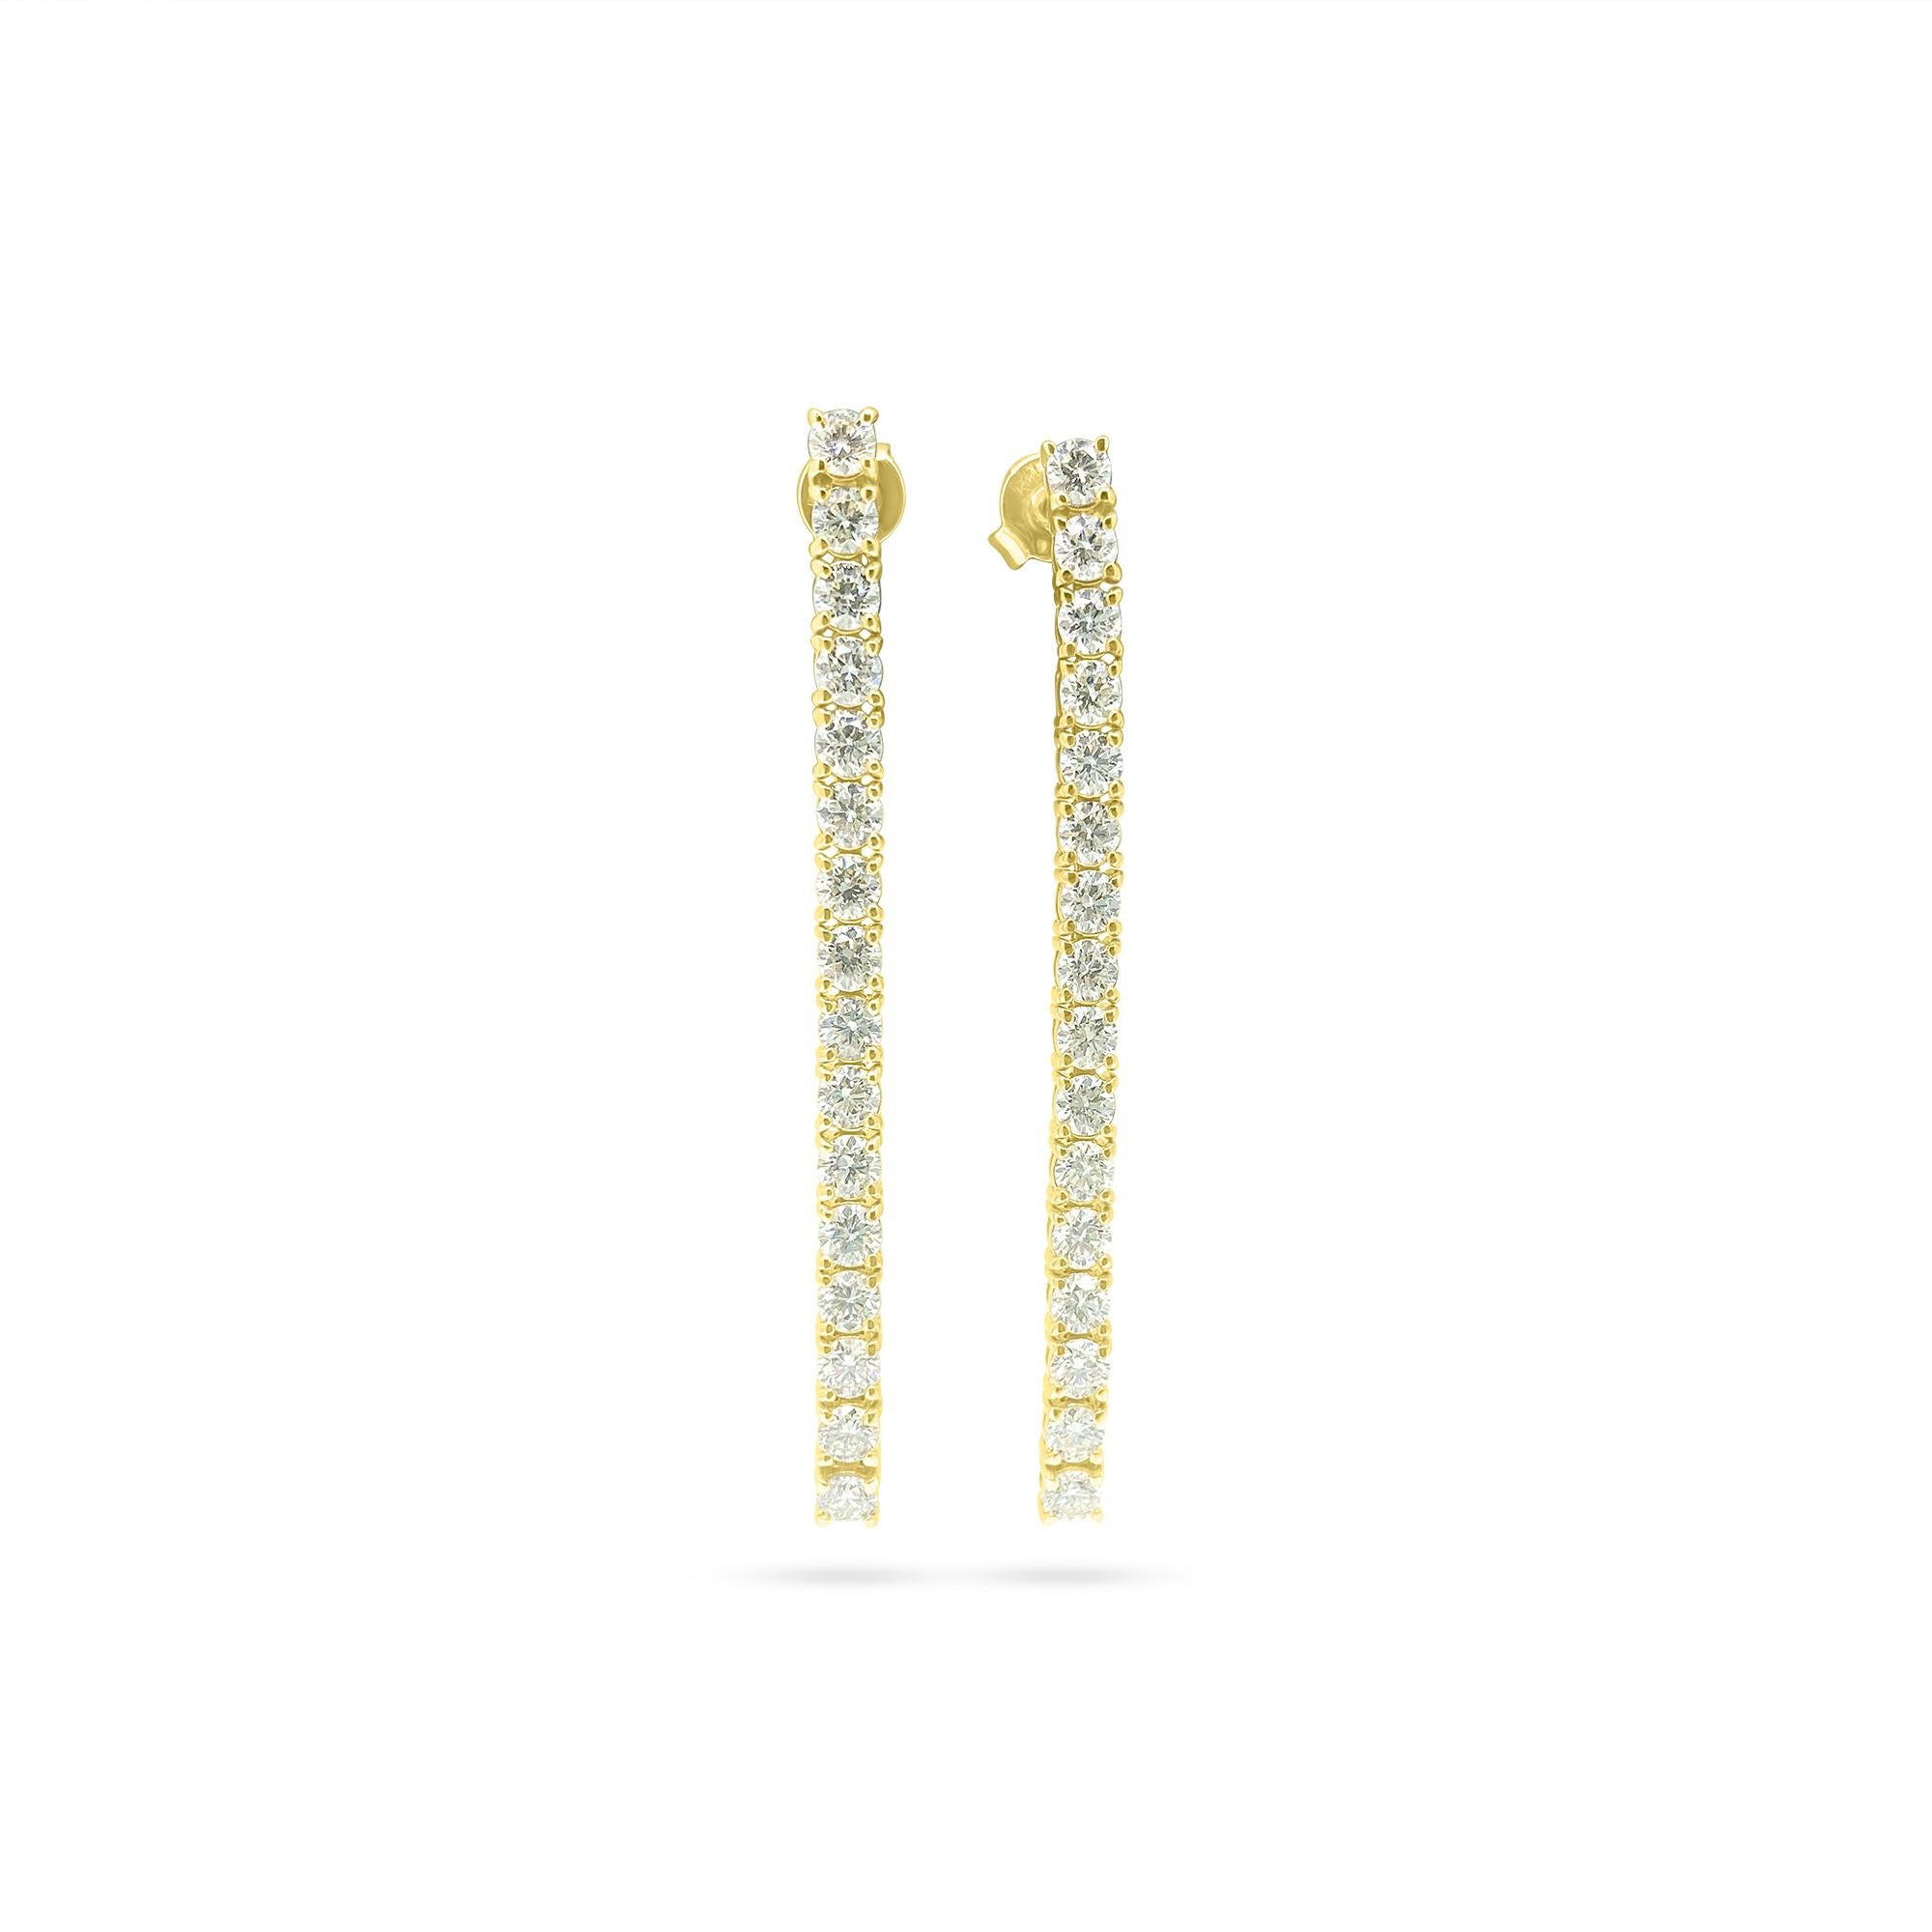 Brilliant Cut 3.50cwt Diamond Tennis Earrings for Her For Sale